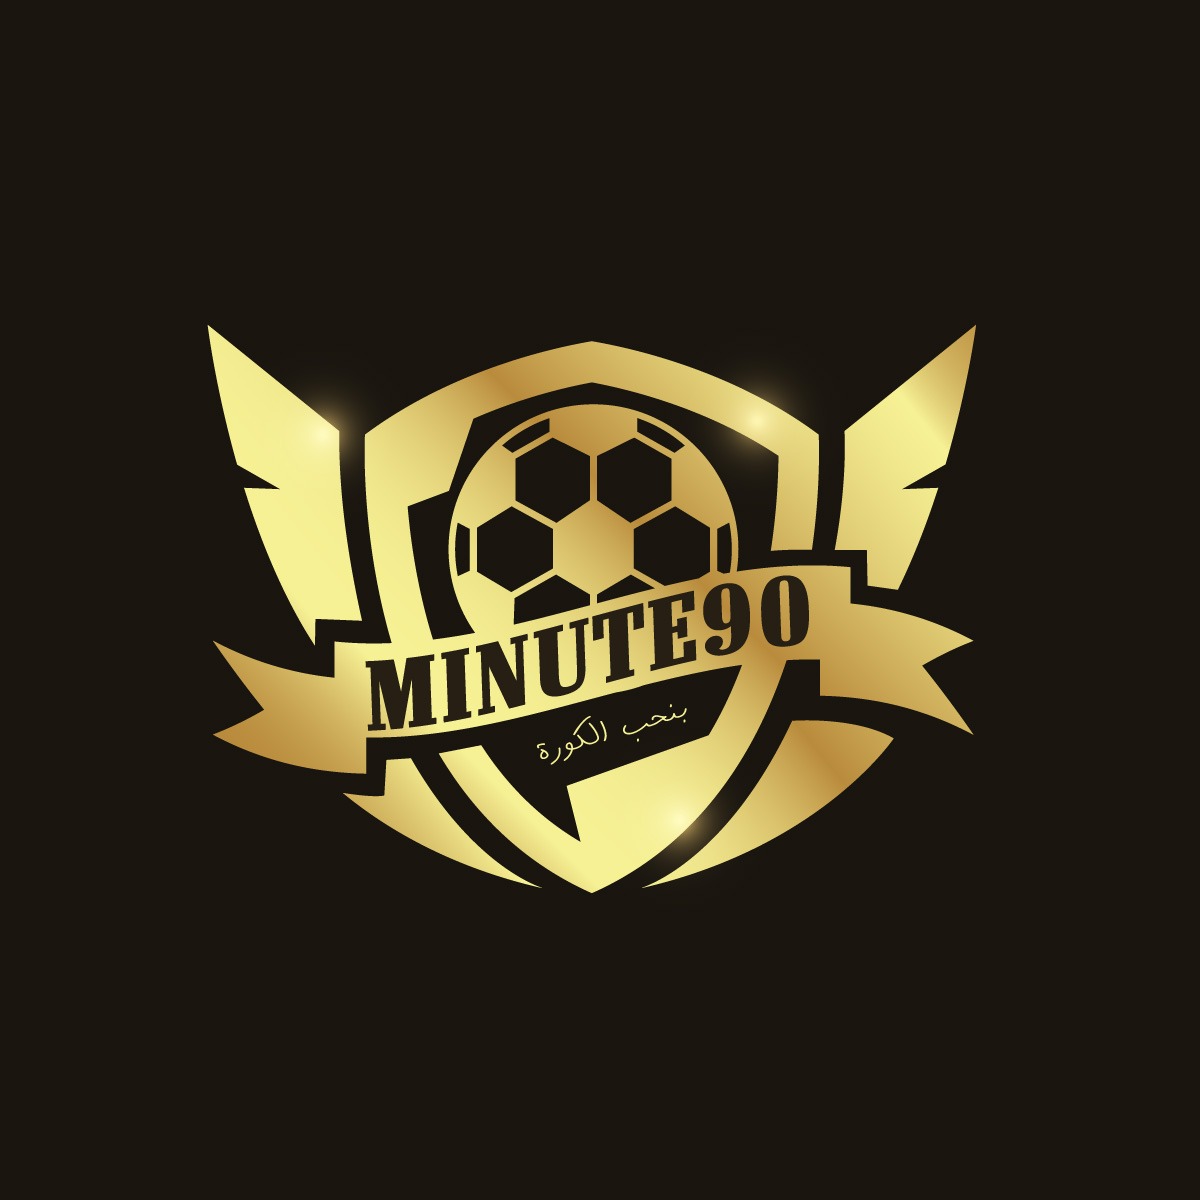 Minute 90